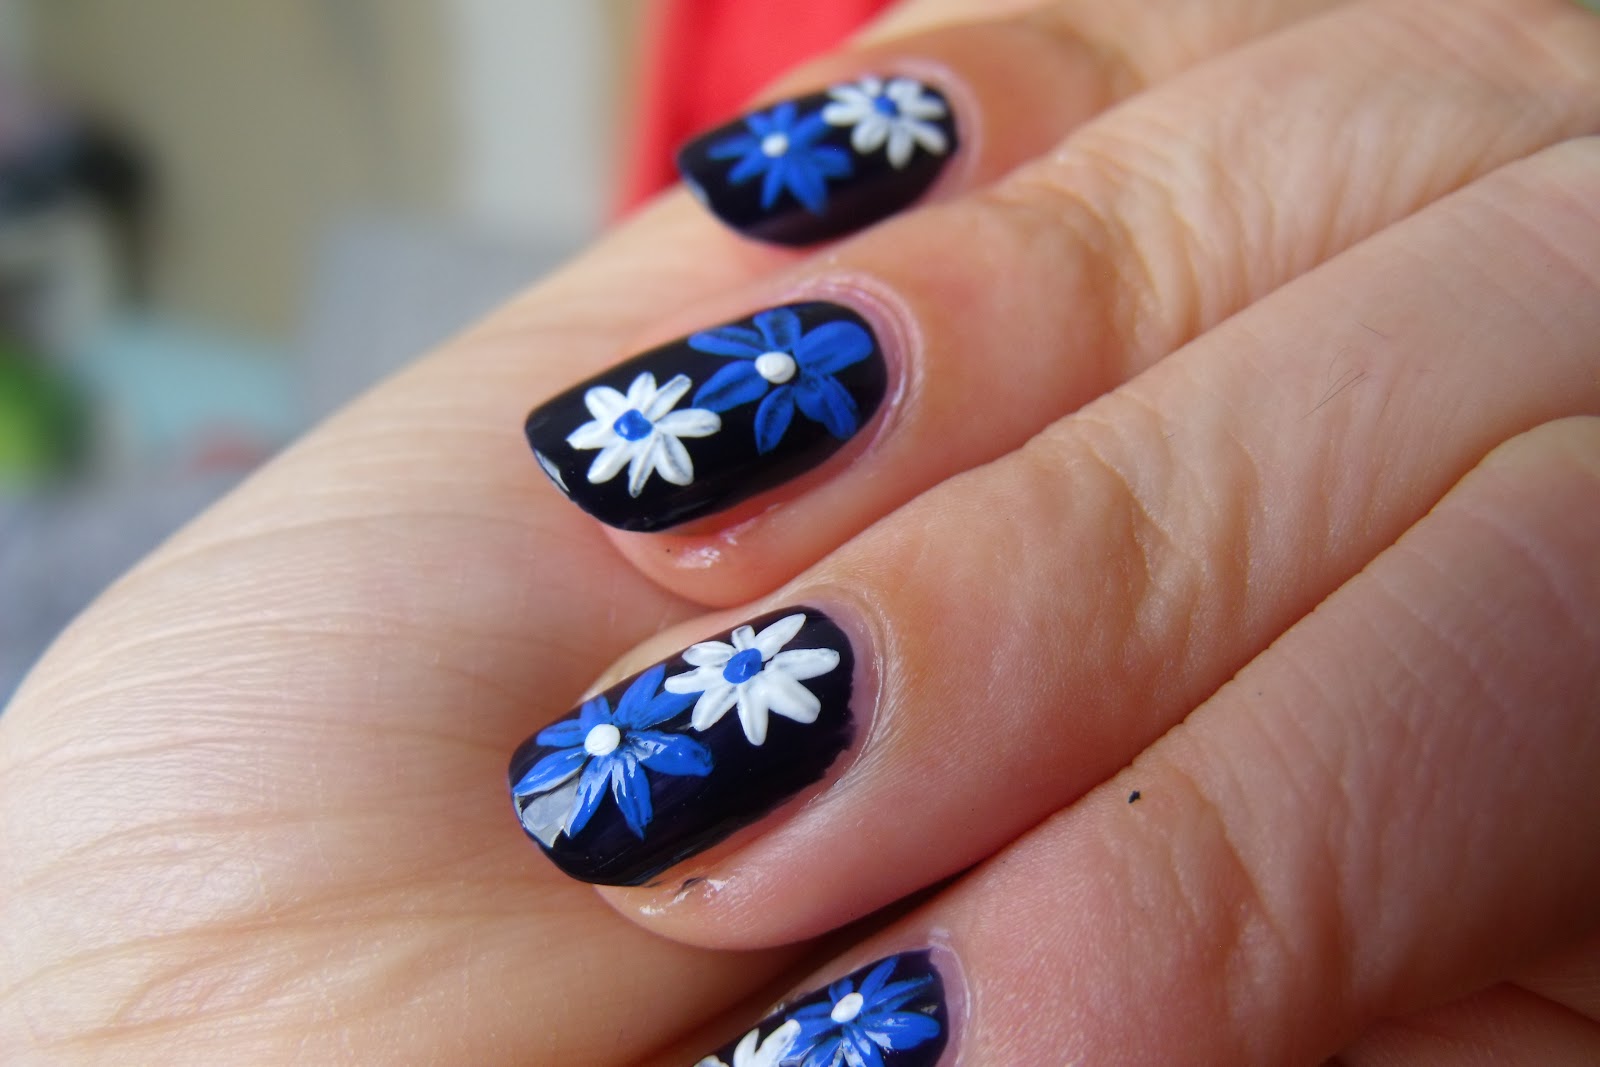 2. Creative Nail Art Designs to Try Now - wide 9